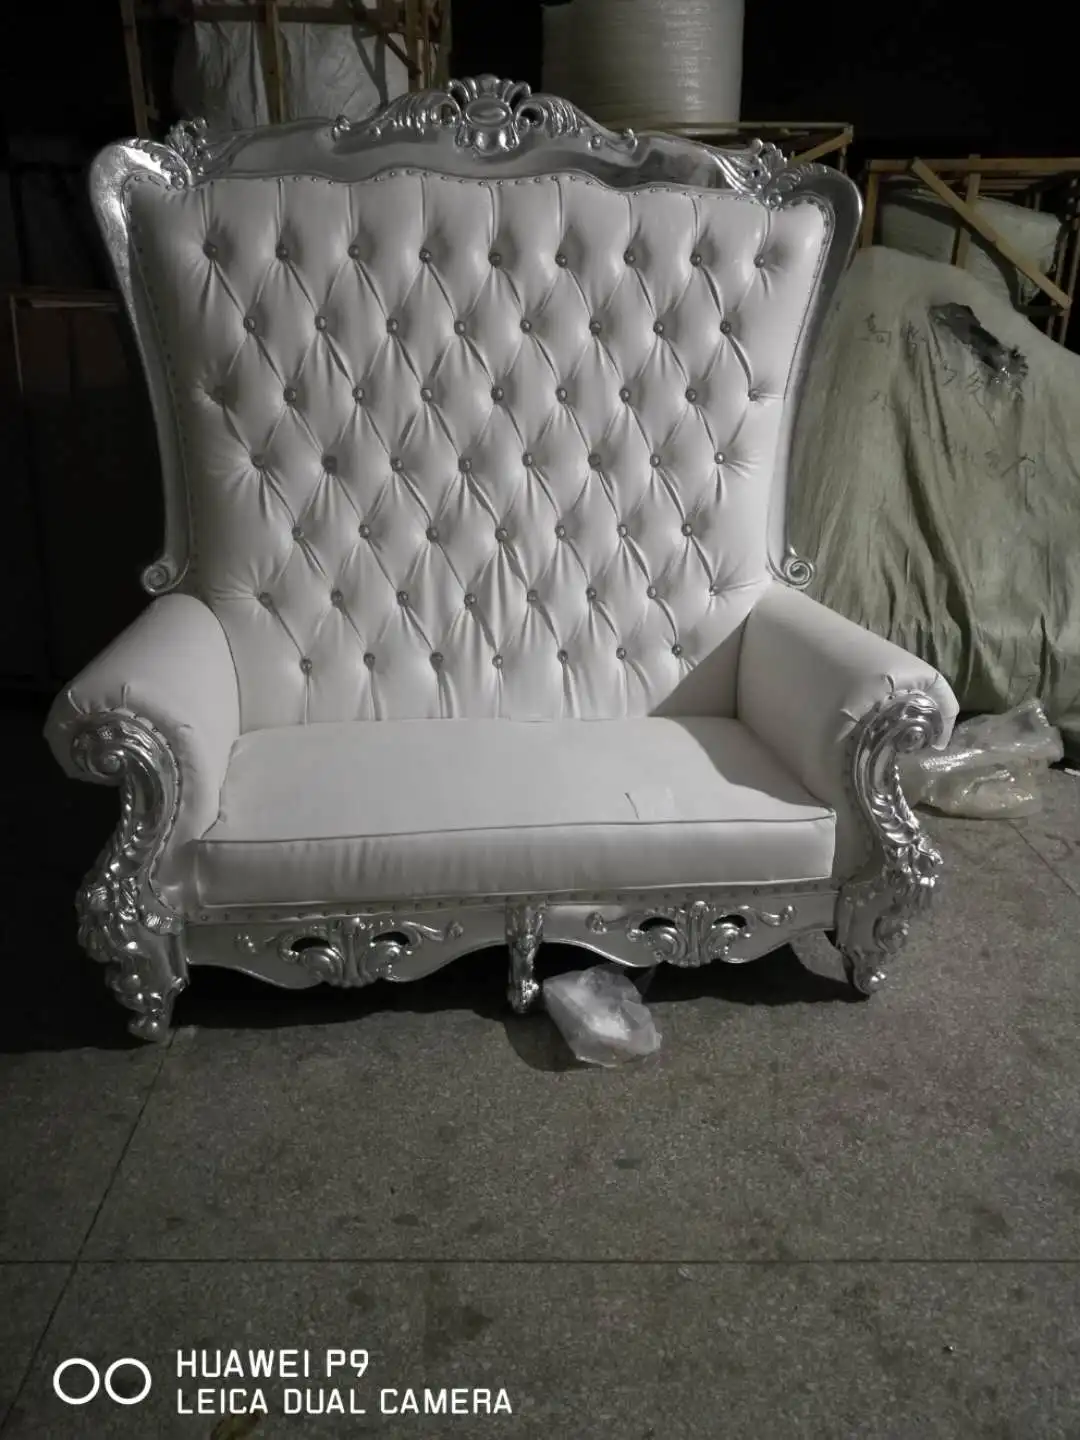 classical high back two seater king throne wedding chair